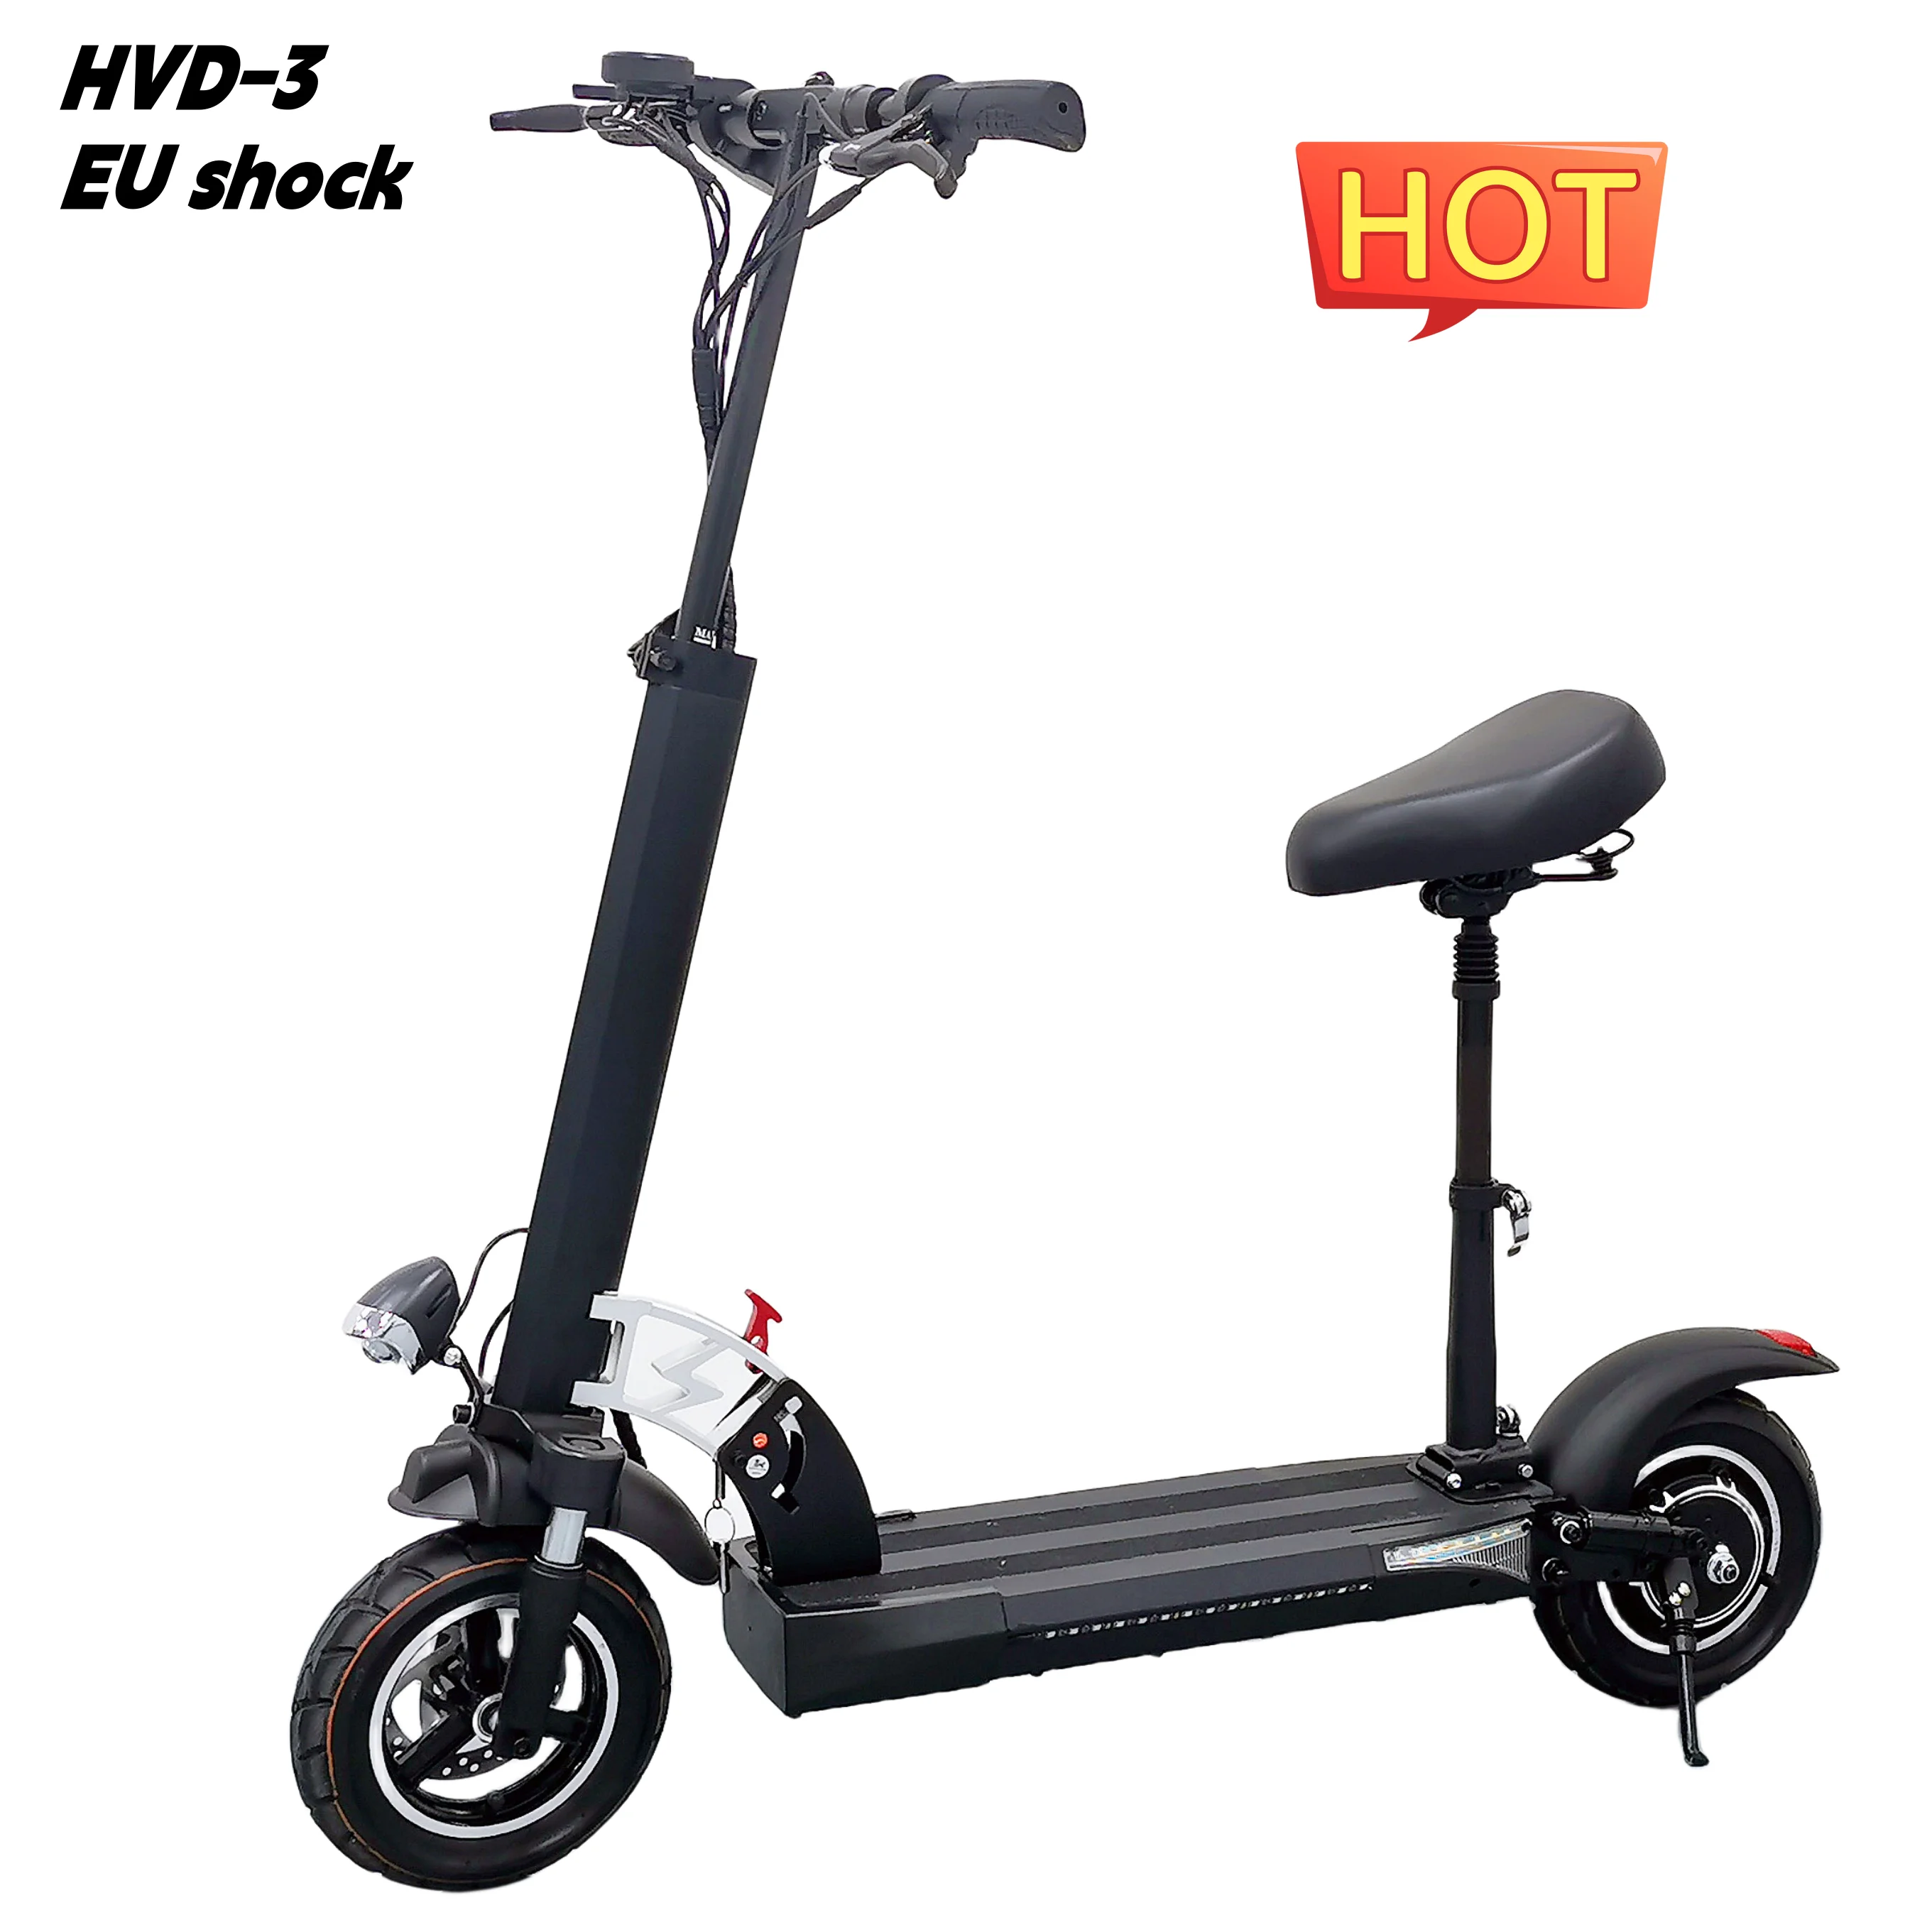 

Free shipping foldable key to lock seat 800w rear motor 15Ah electric scooter EU warehouse 48v with seat for adults